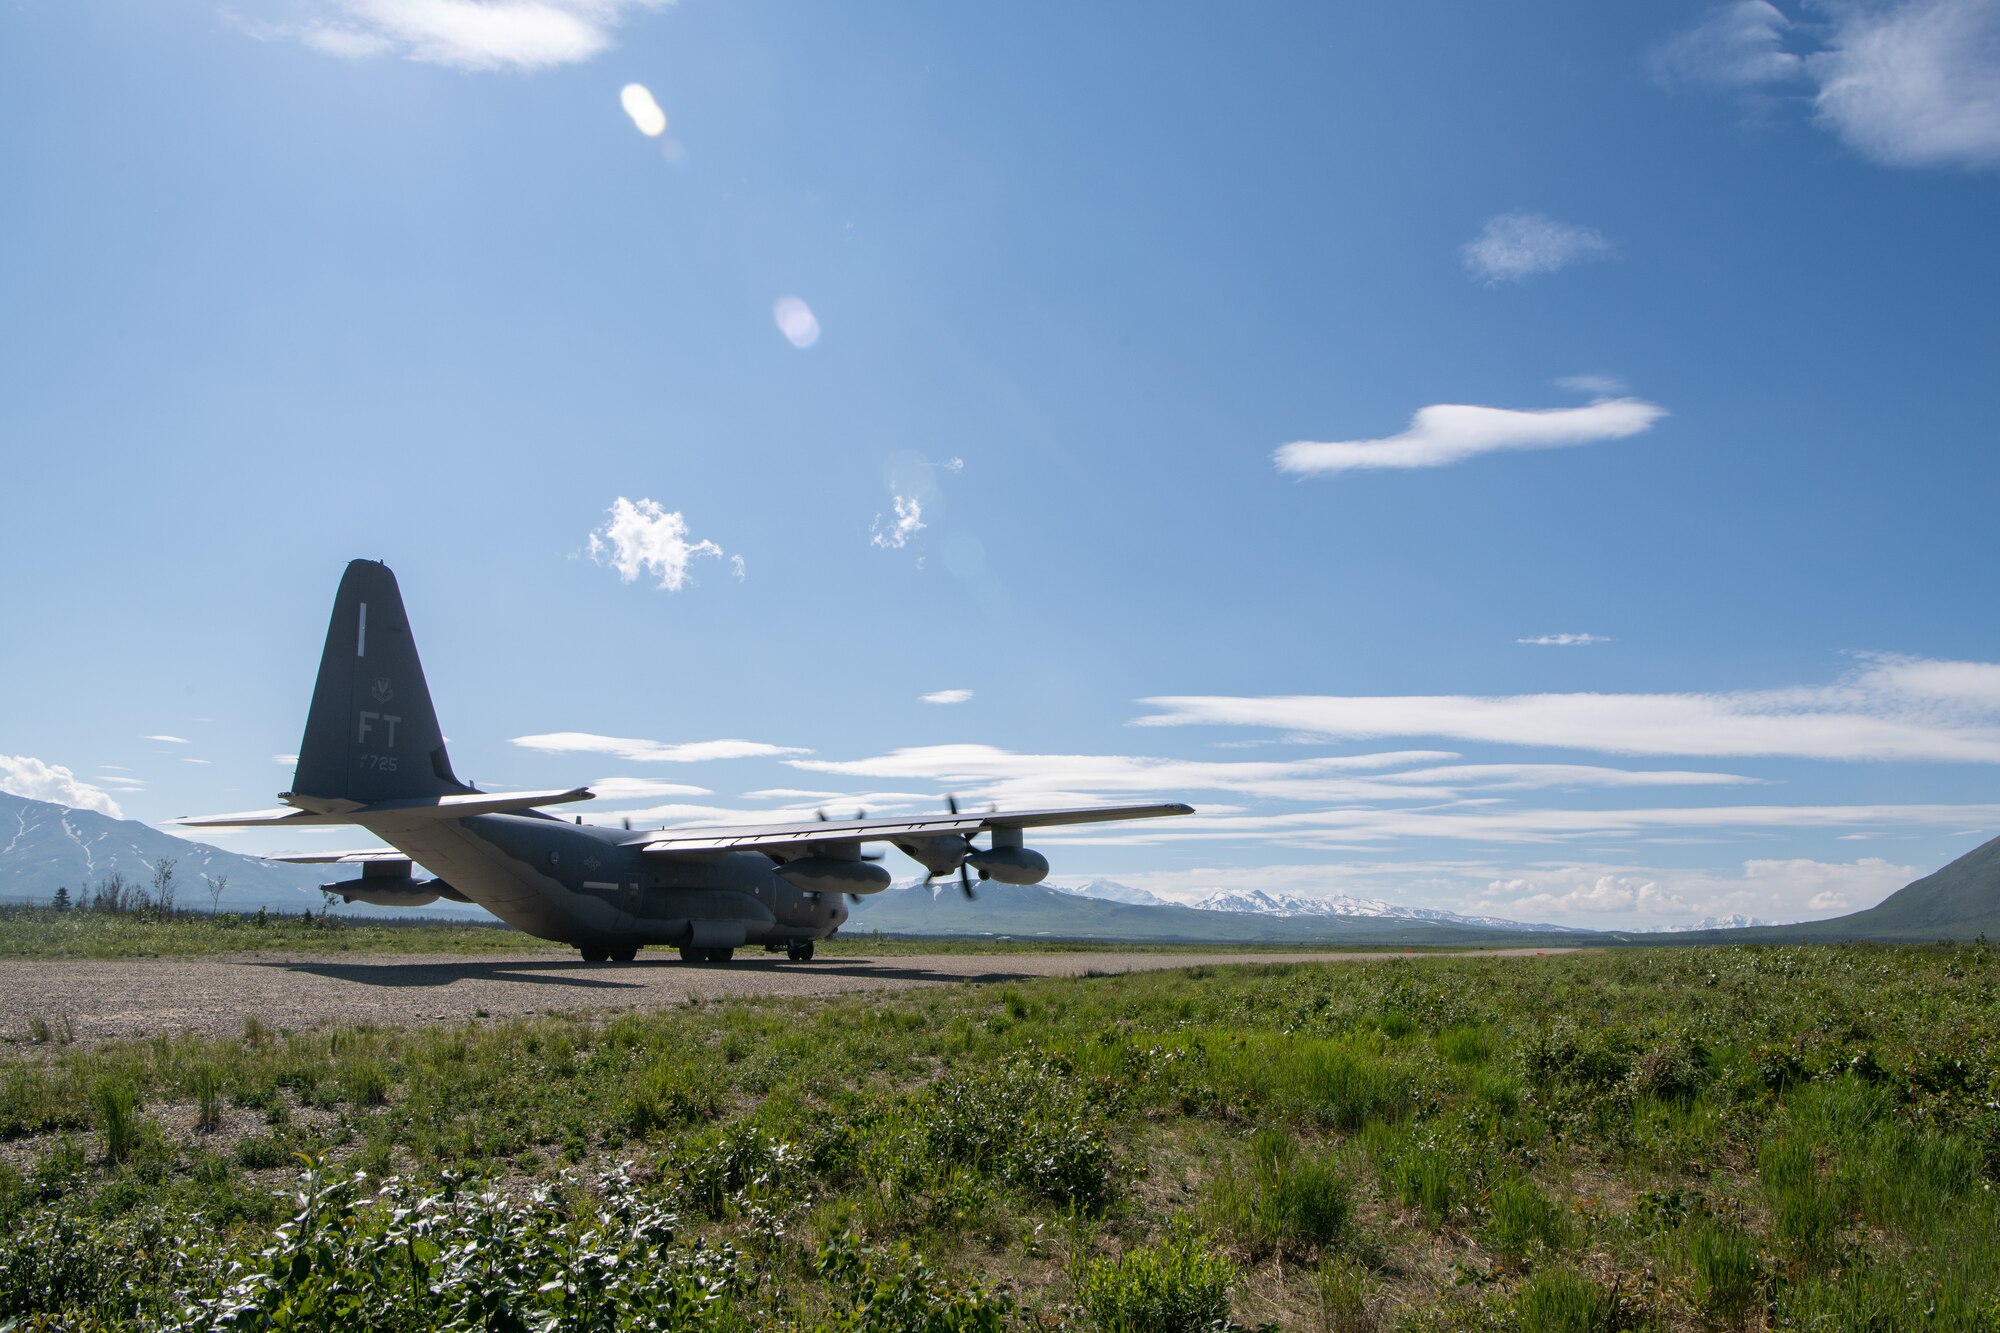 A C-130 sits at the end of a dirt strip runway.